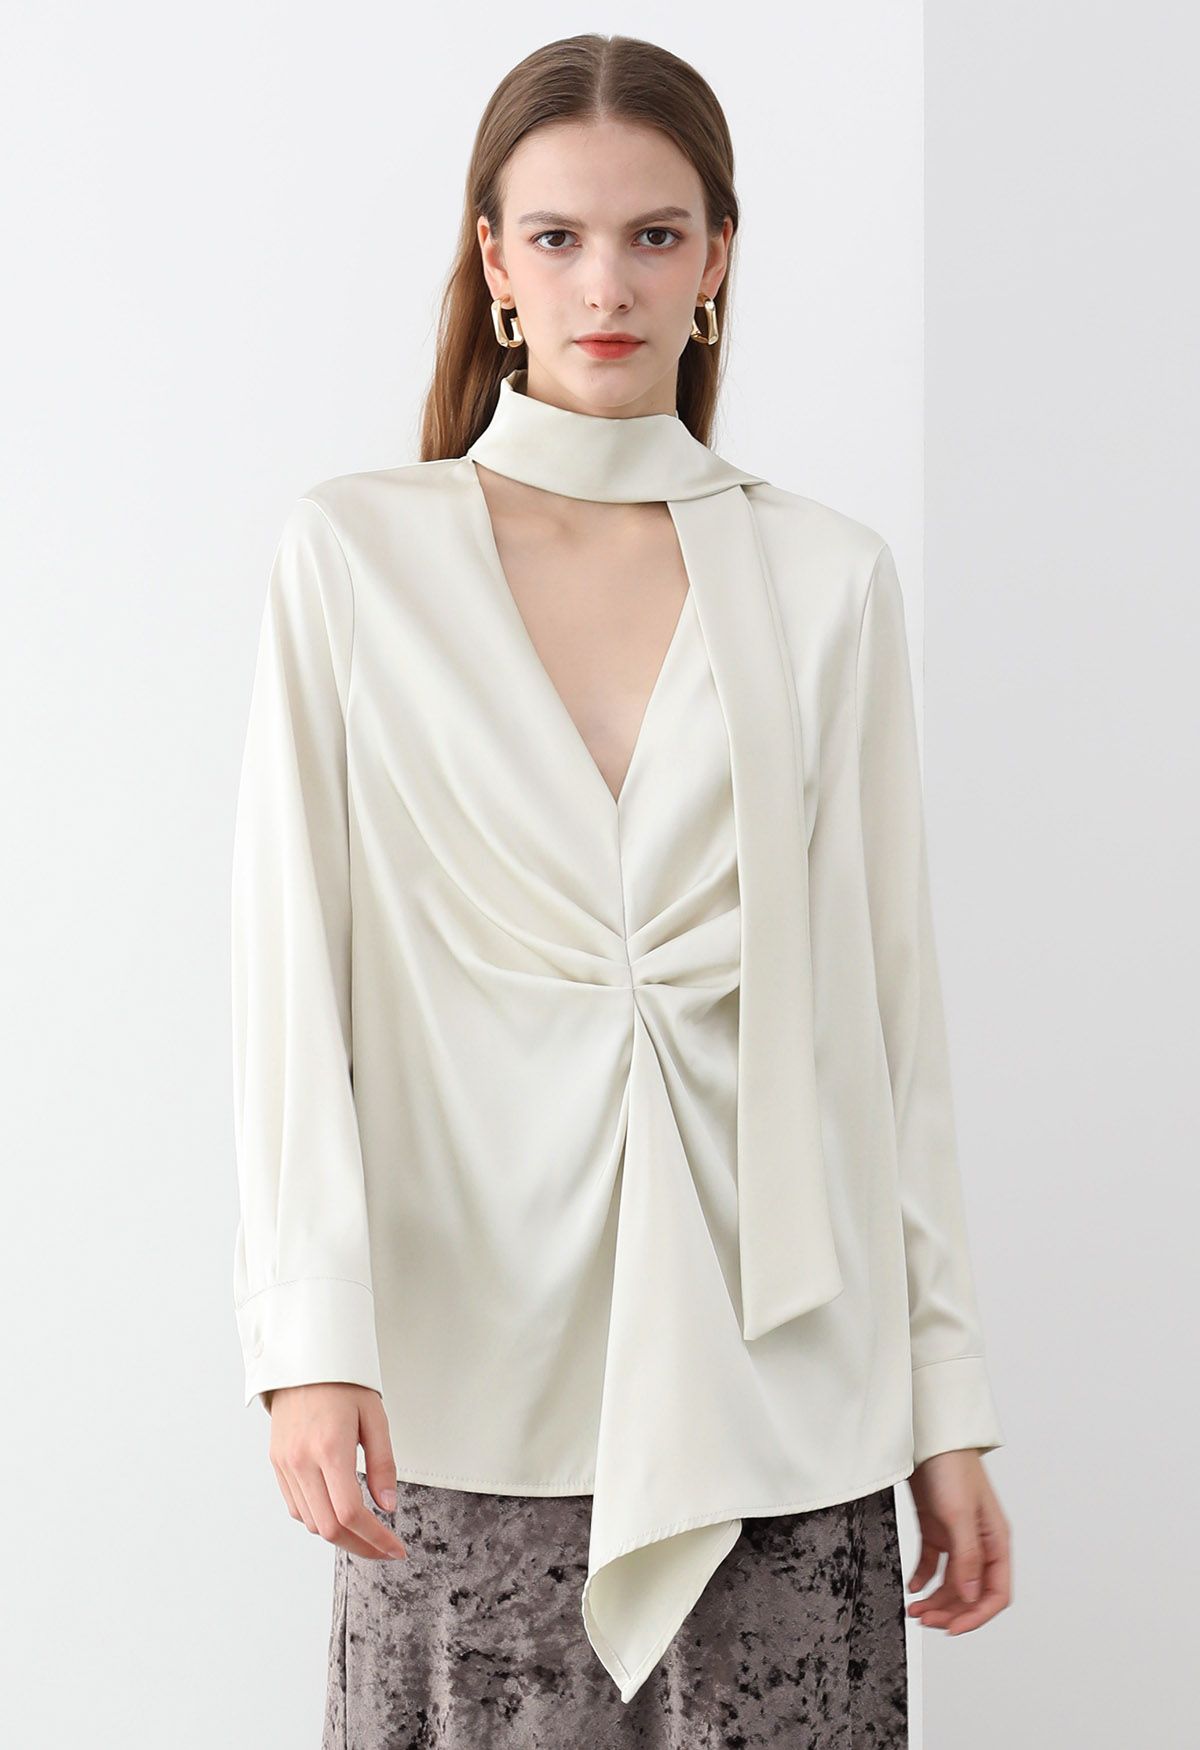 Tie Sash V-Neck Ruched Satin Top in Ivory - Retro, Indie and Unique Fashion